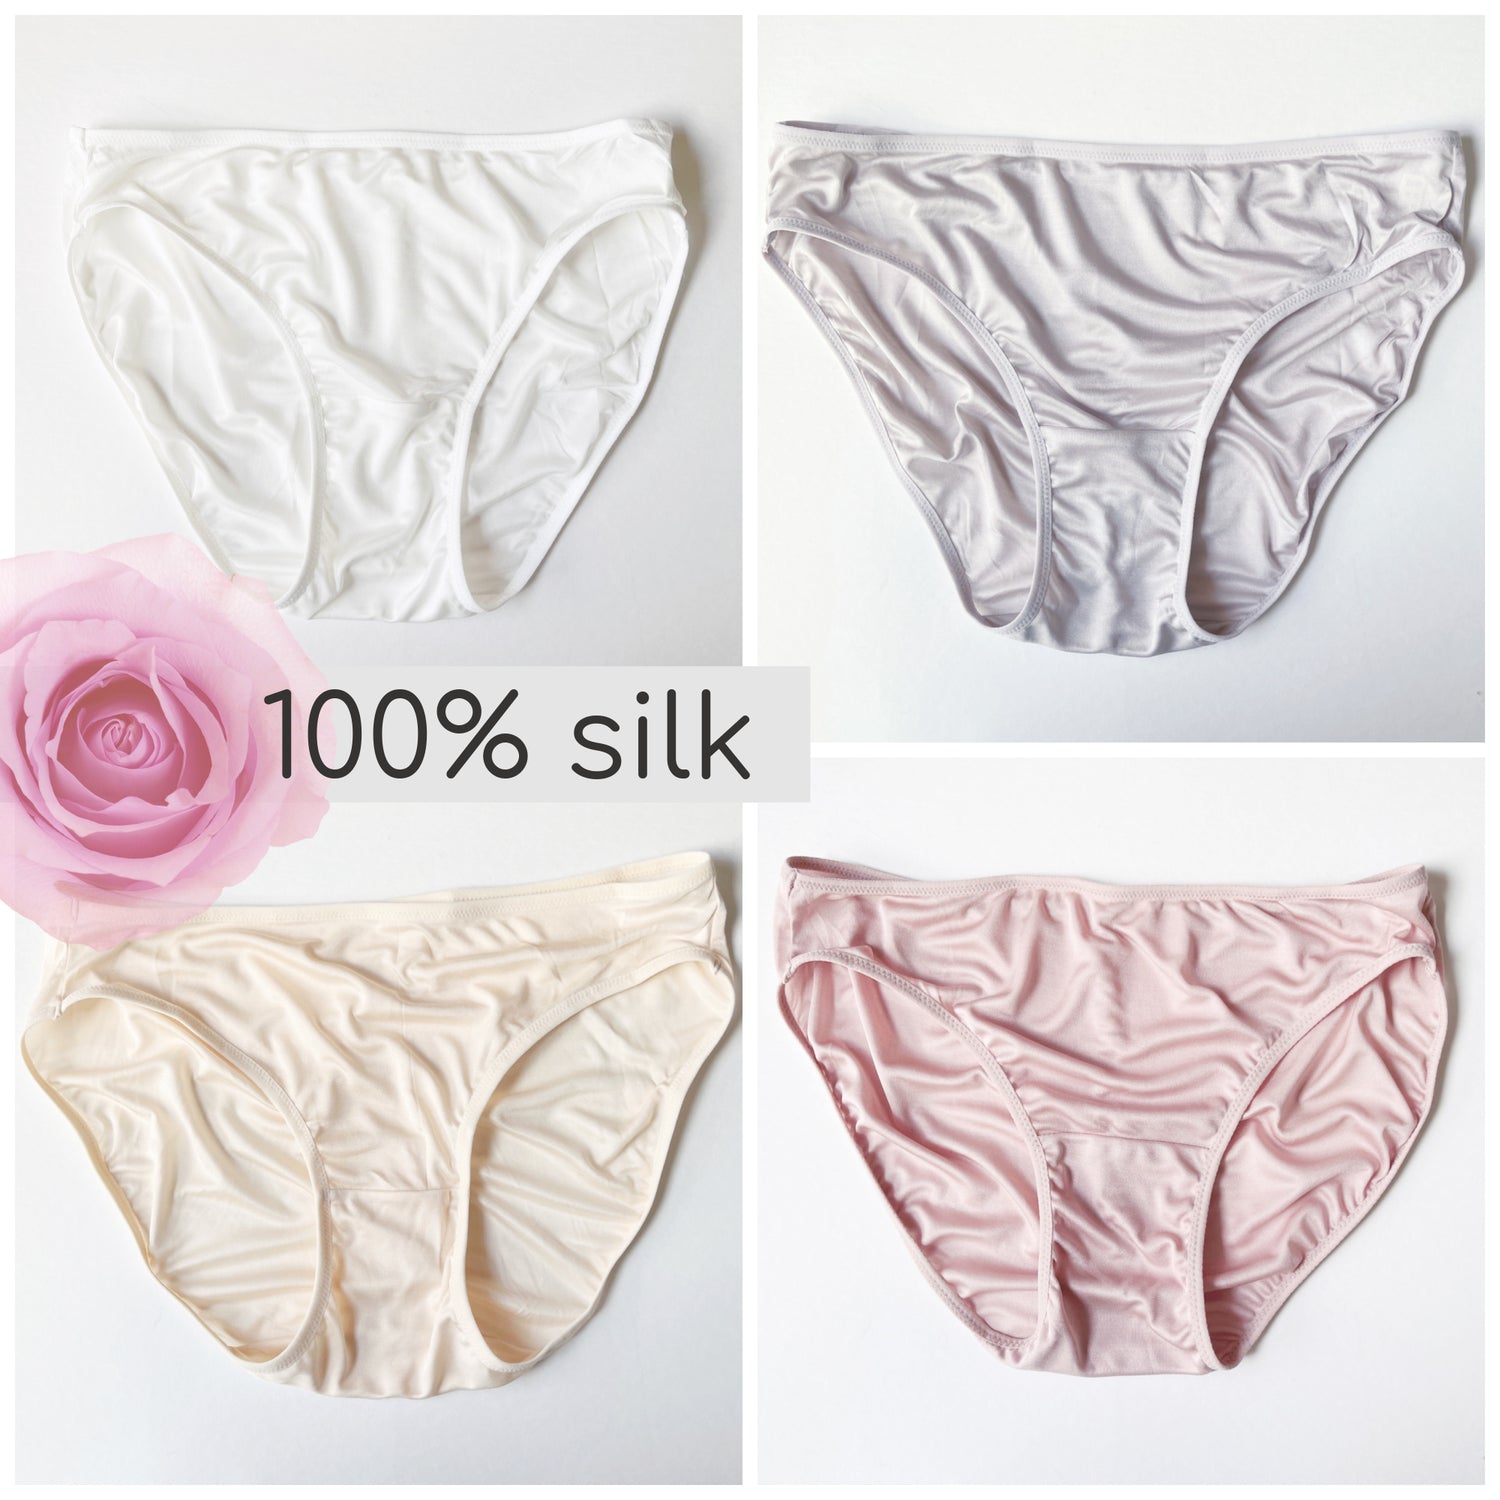 Silk Panty Pictures